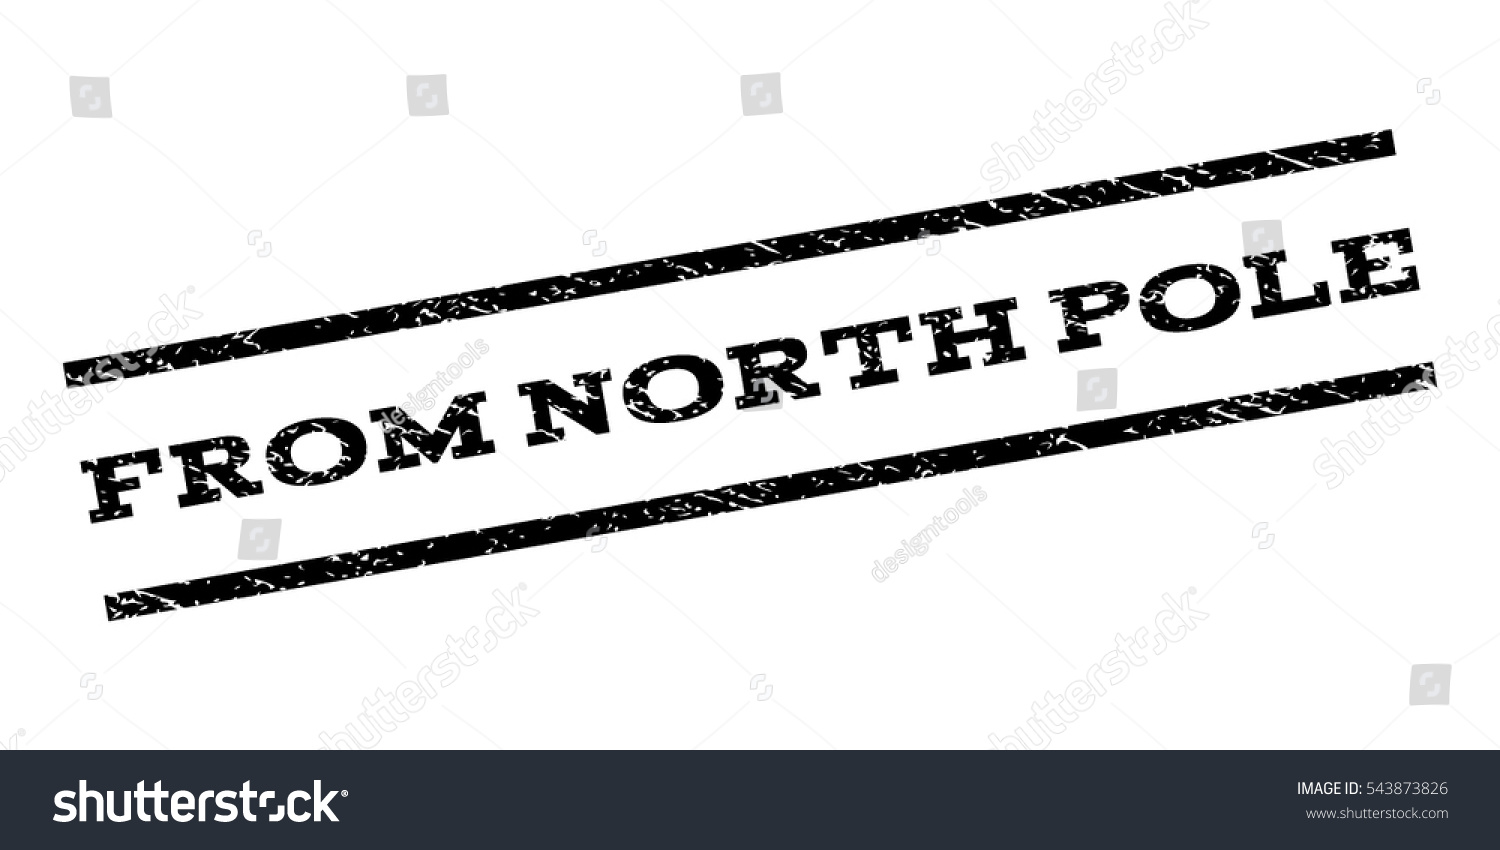 north-pole-watermark-stamp-text-caption-stock-vector-royalty-free-543873826-shutterstock